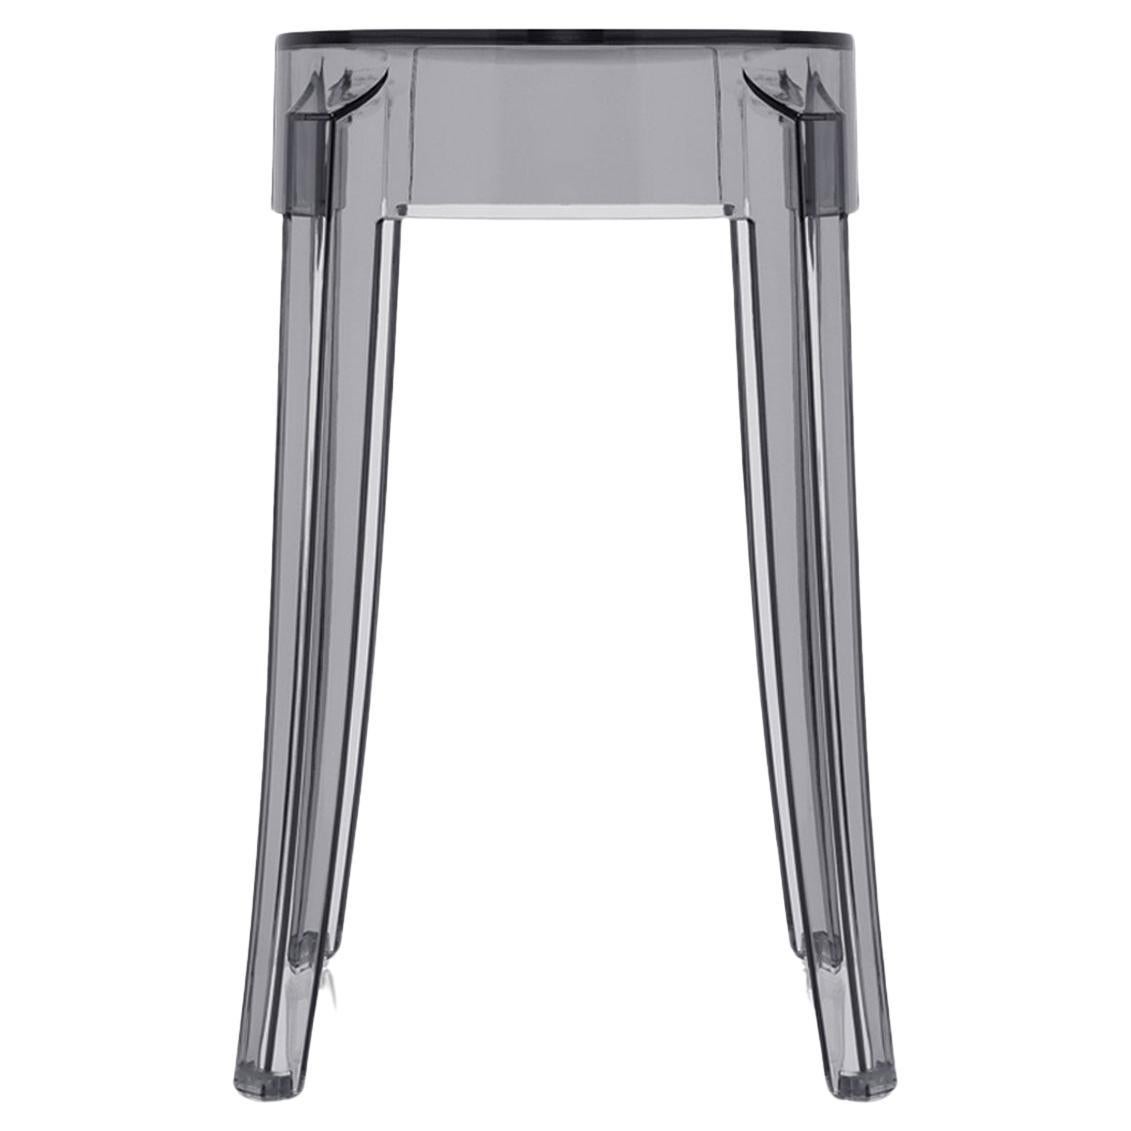 Set of 2 Kartell Charles Ghost Small Stools in Smoke Grey by Philippe Starck